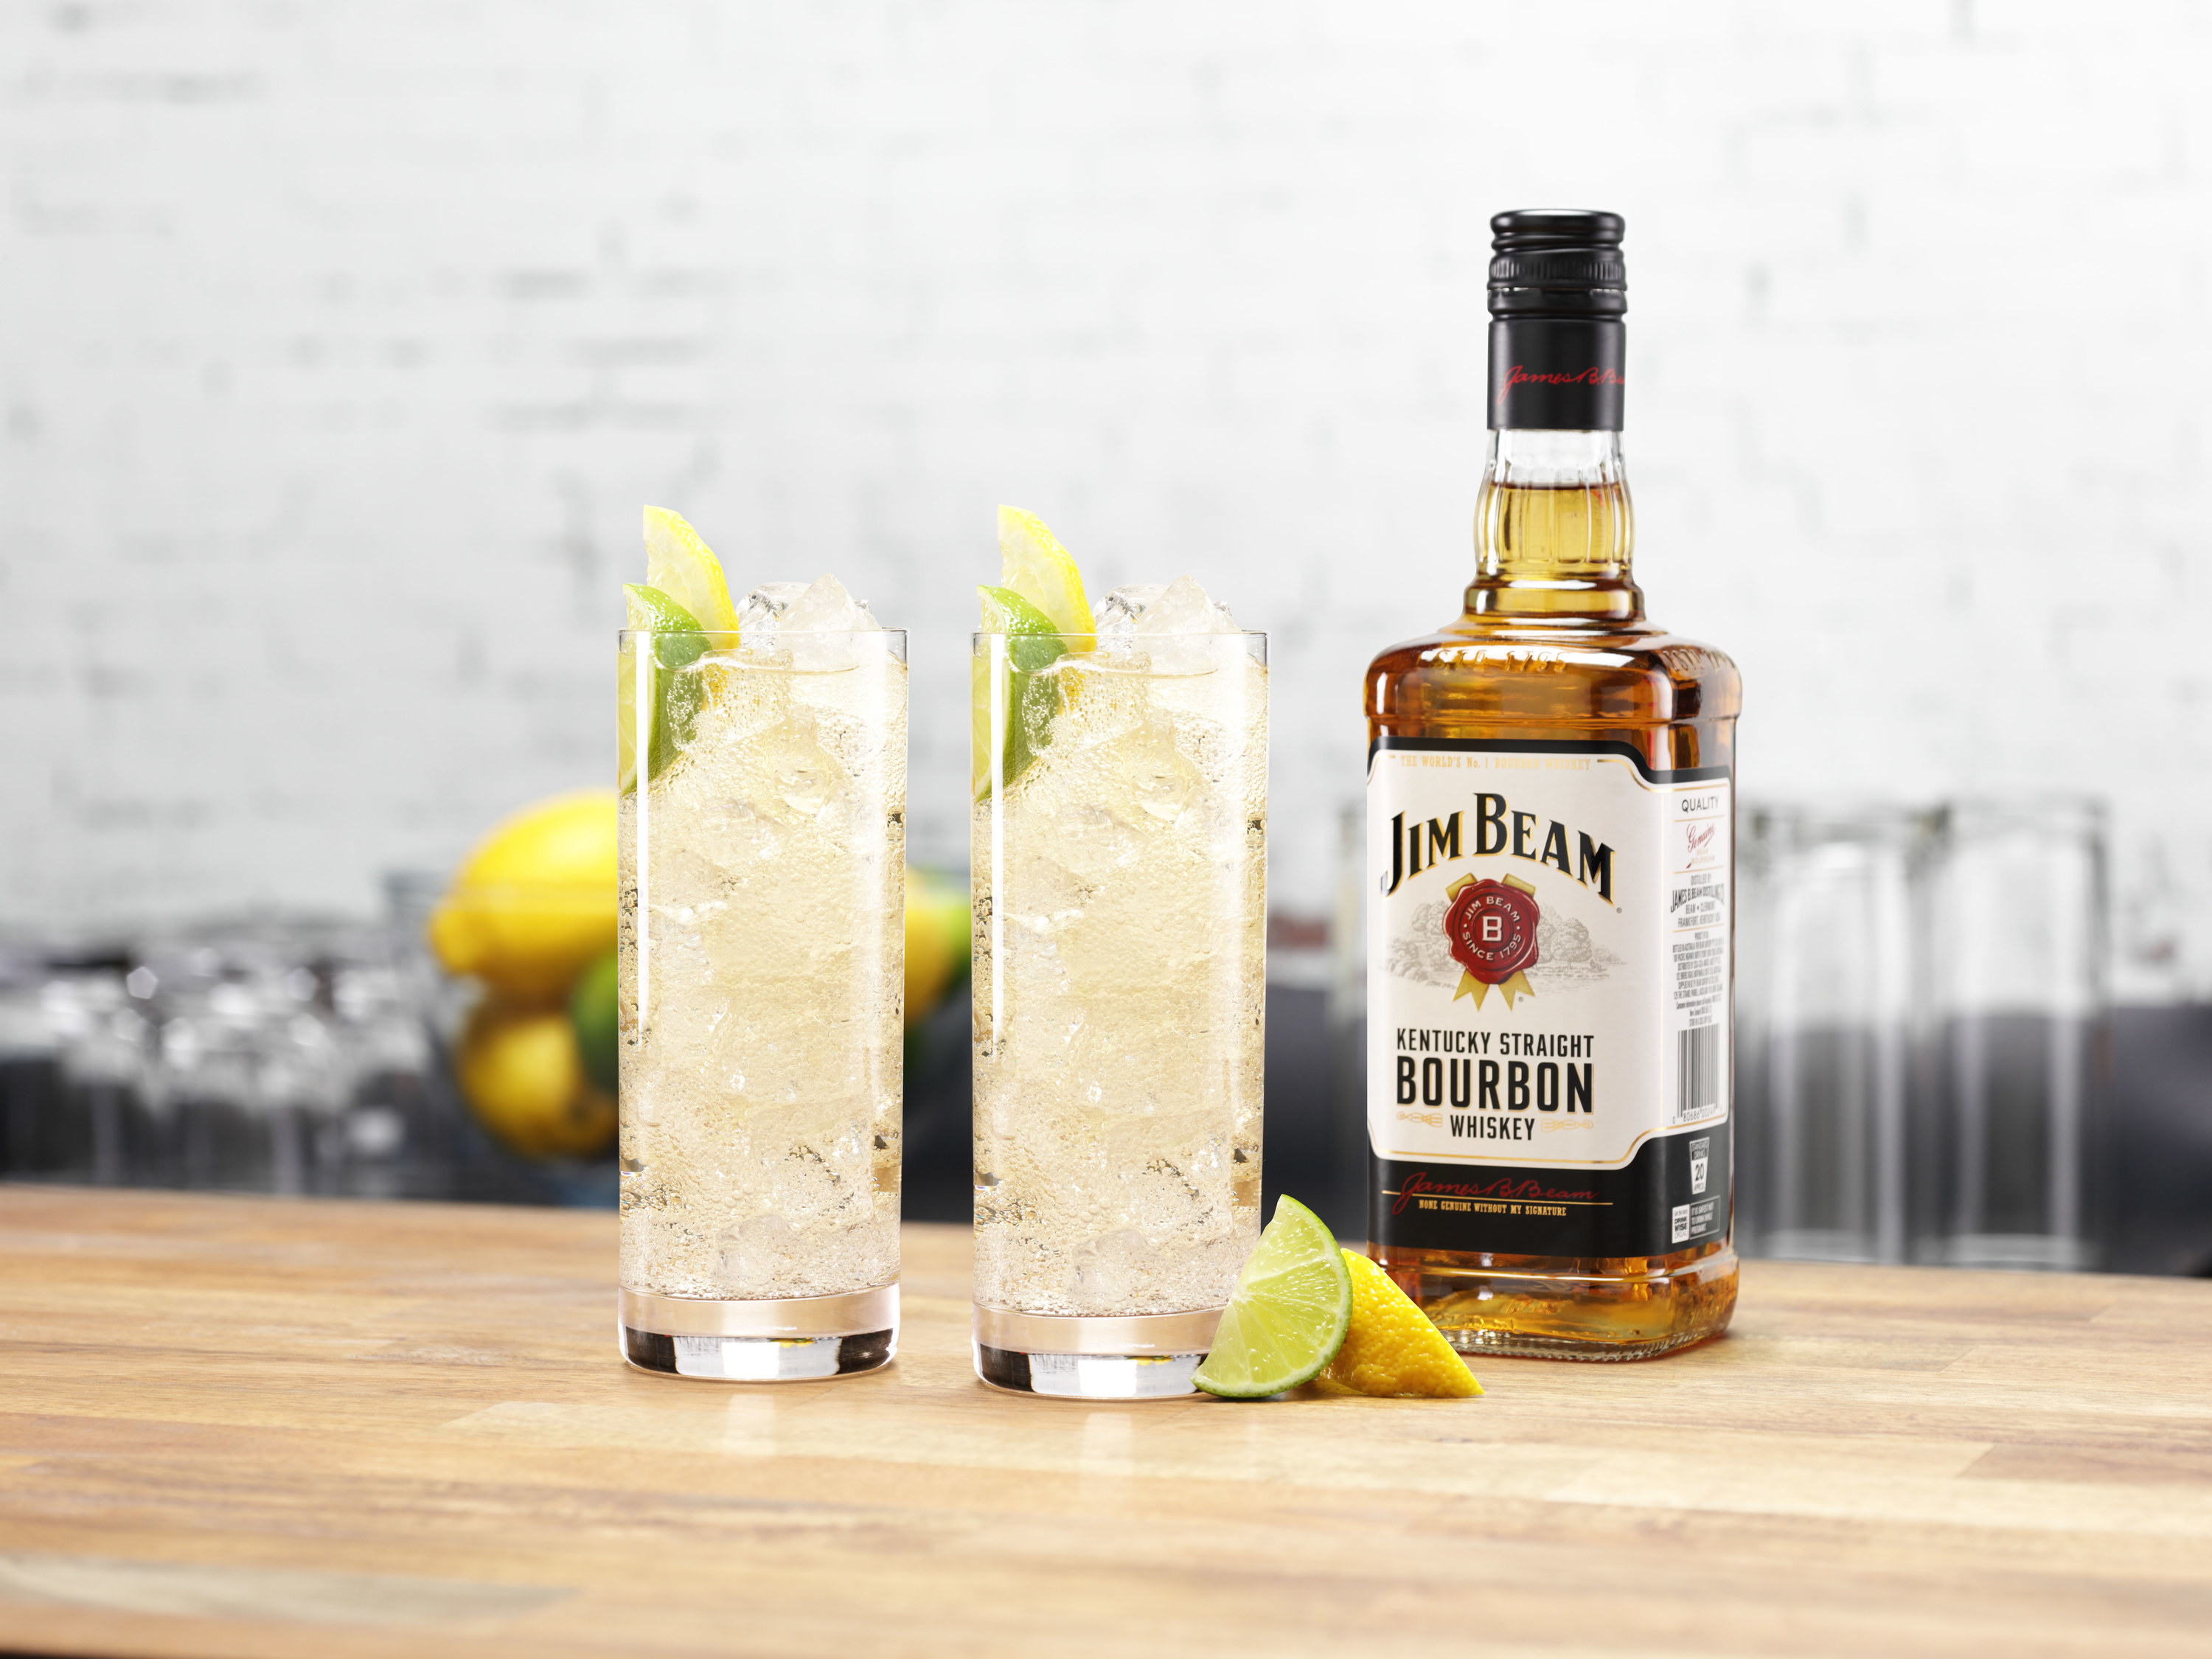 Two highball glasses filled with ice and liquid, garnished with lime and lemon next to a Jim Beam bottle 